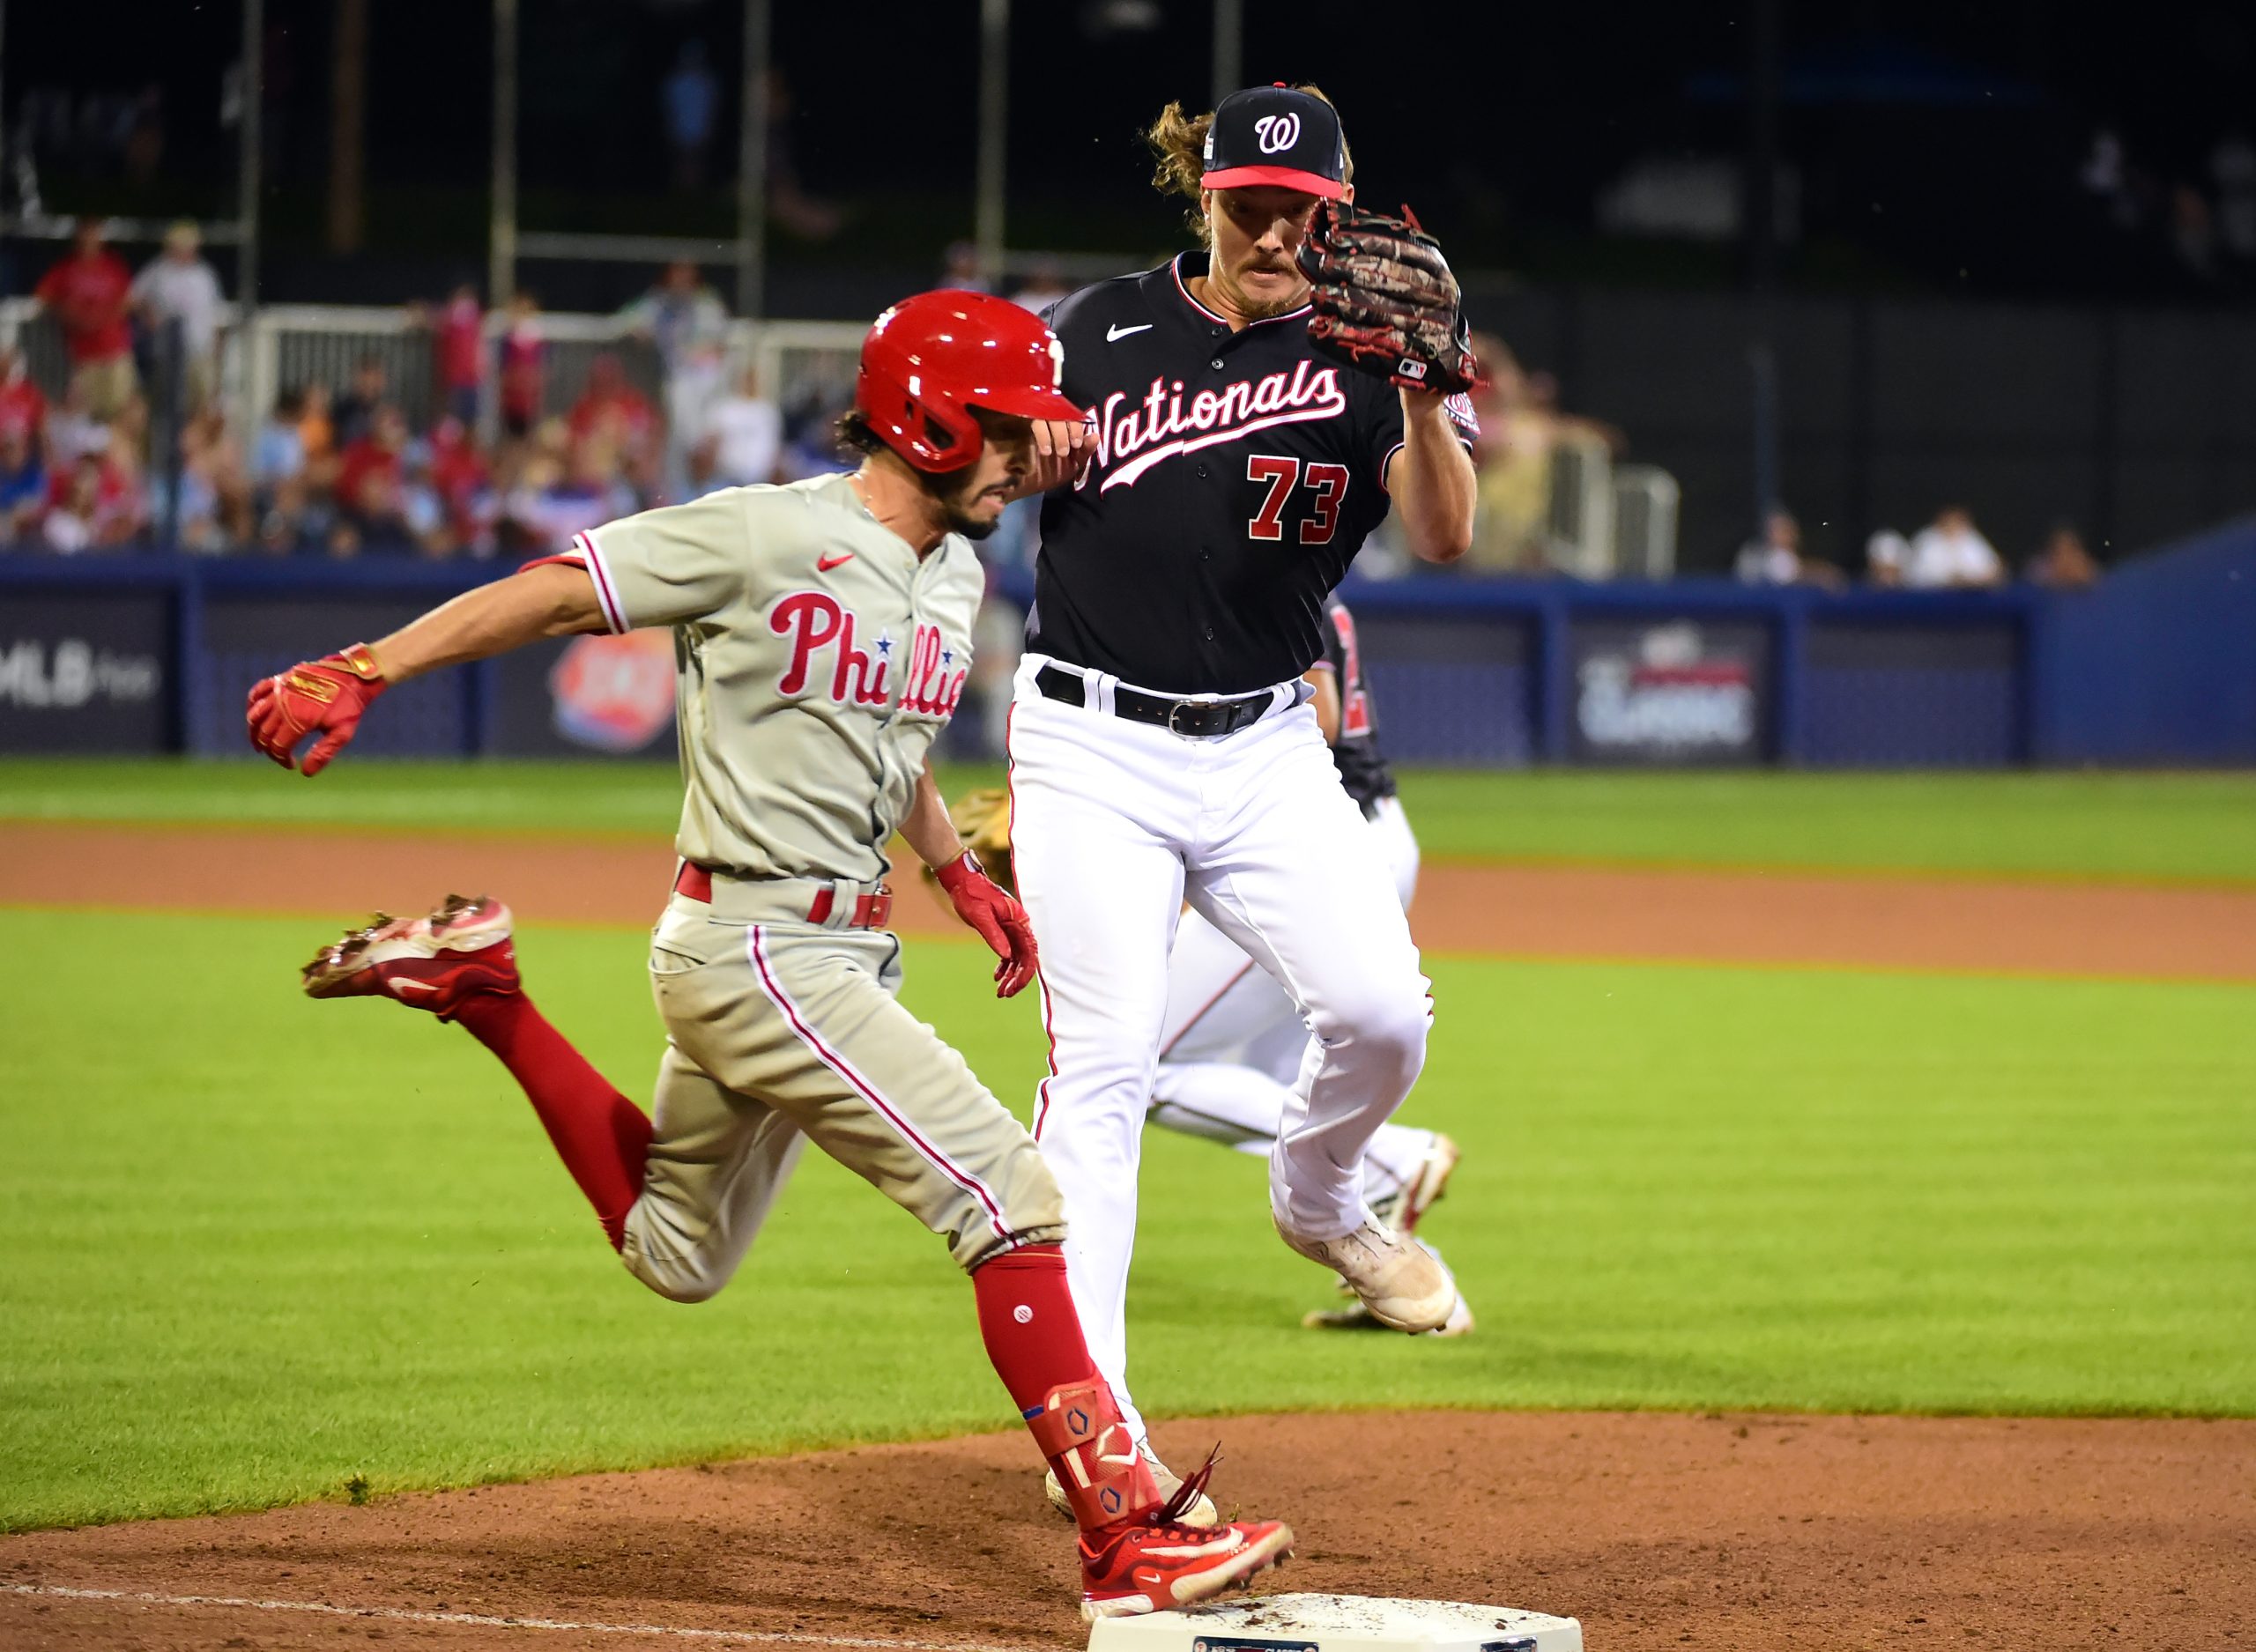 For a redemption story, look to the Phillies, not the Astros